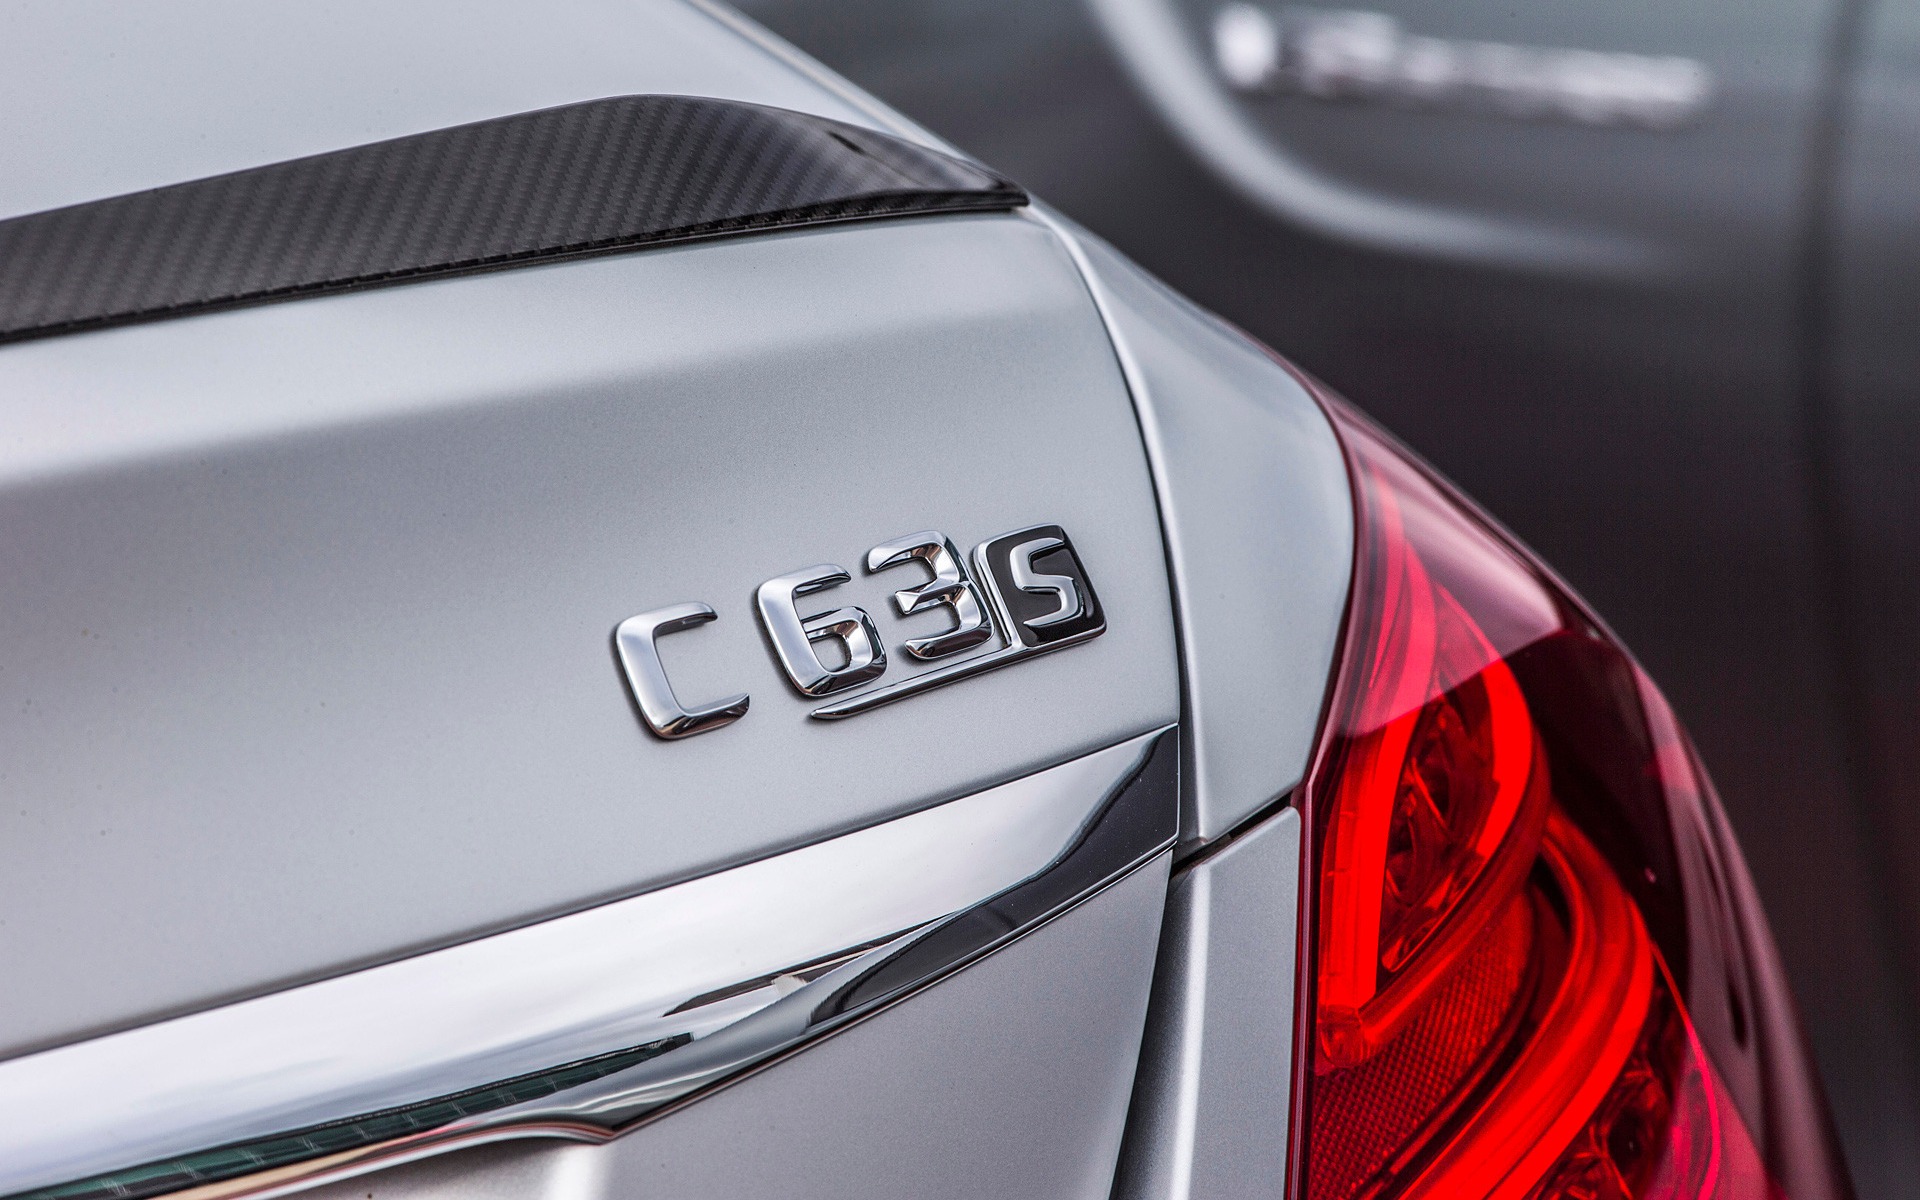 The insignia and the rather discreet carbon fibre spoiler of the C 63 S.